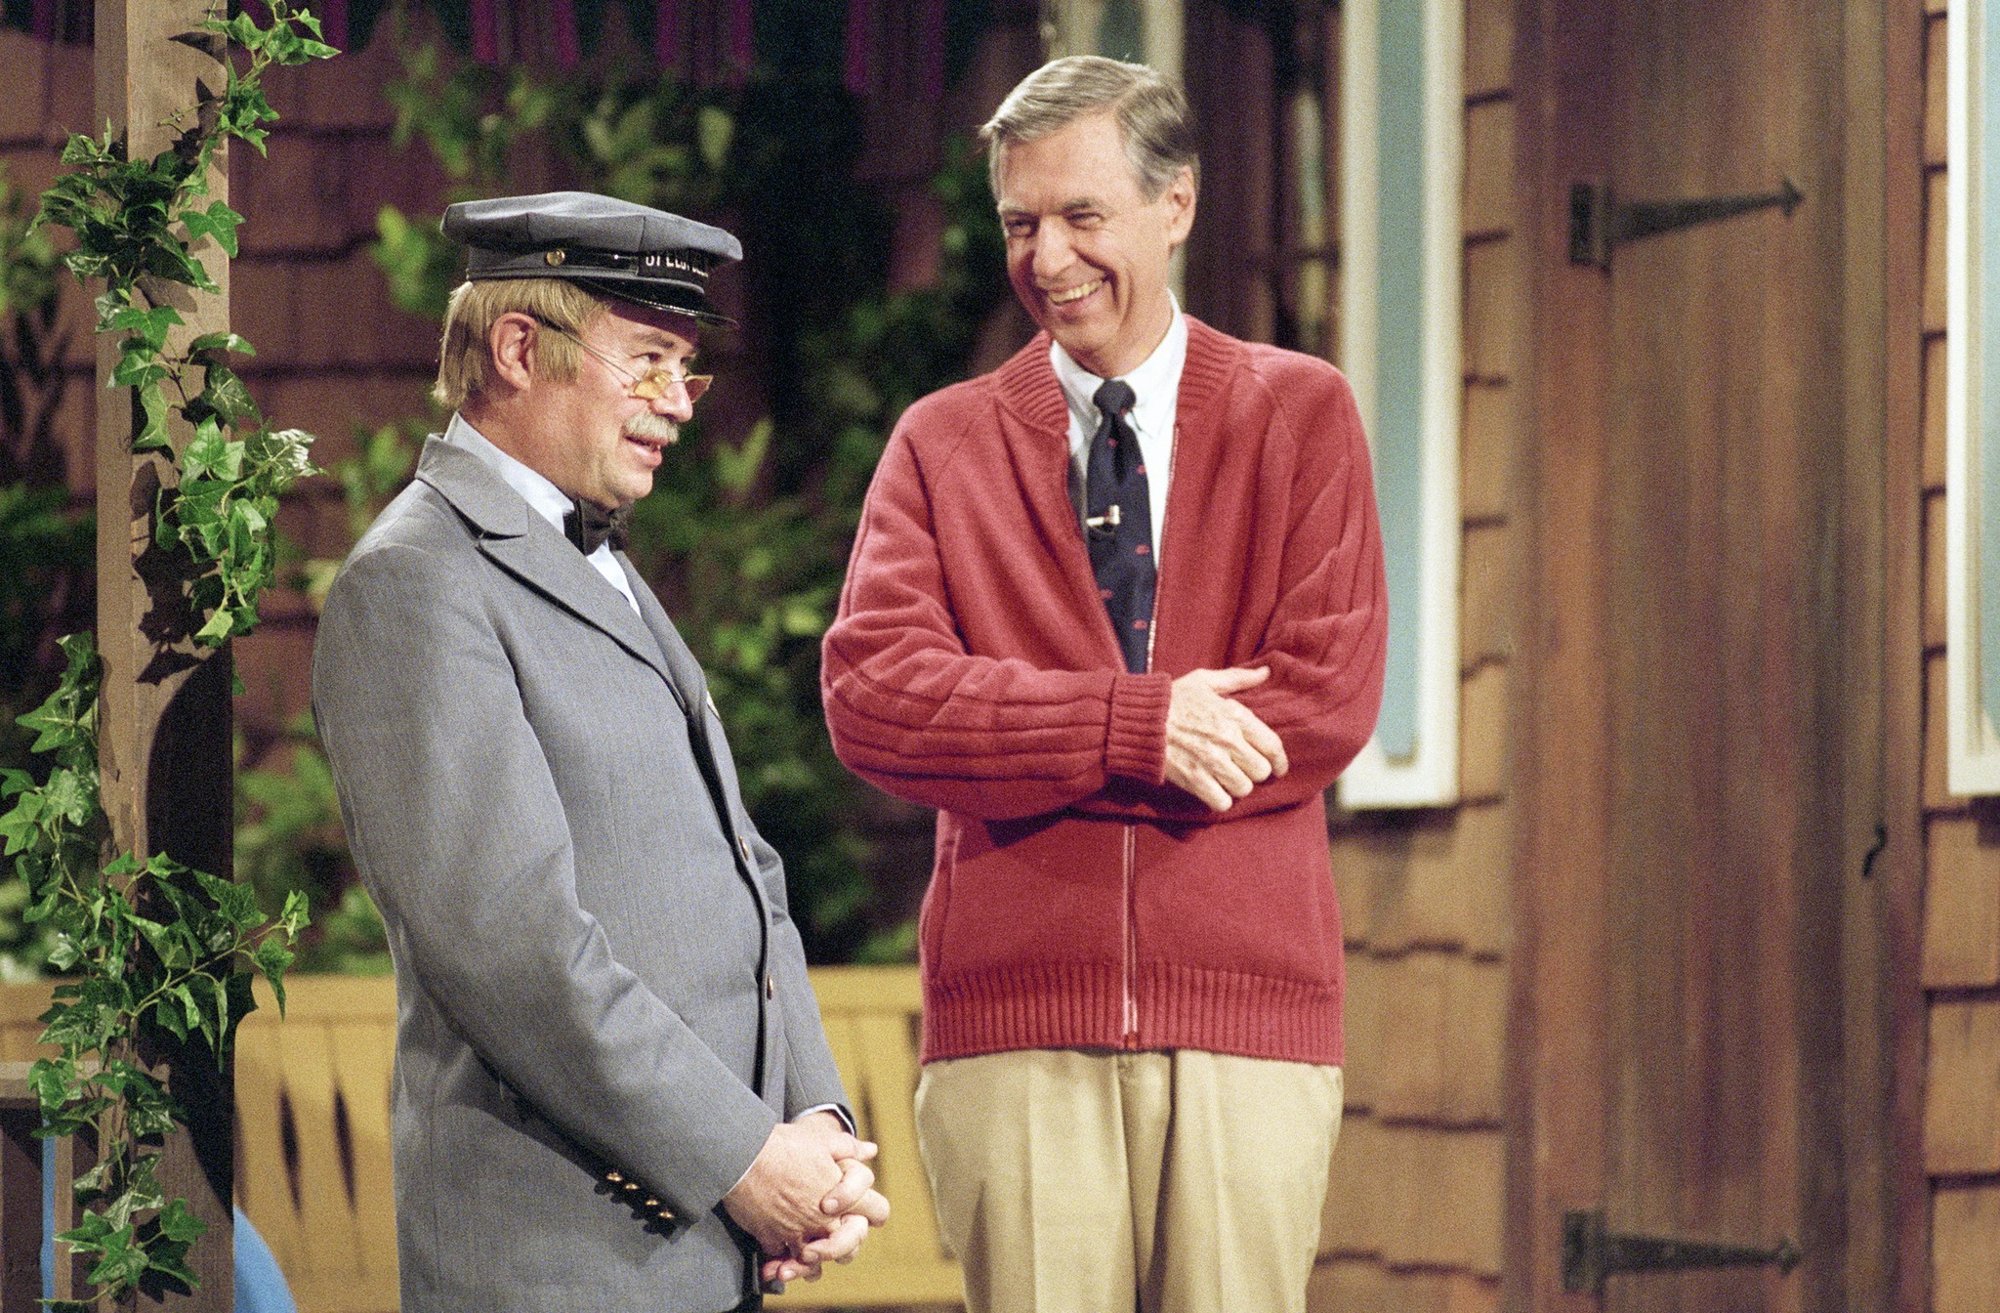 David Newell and Fred Rogers in Focus Features' Won't You Be My Neighbor? (2018)